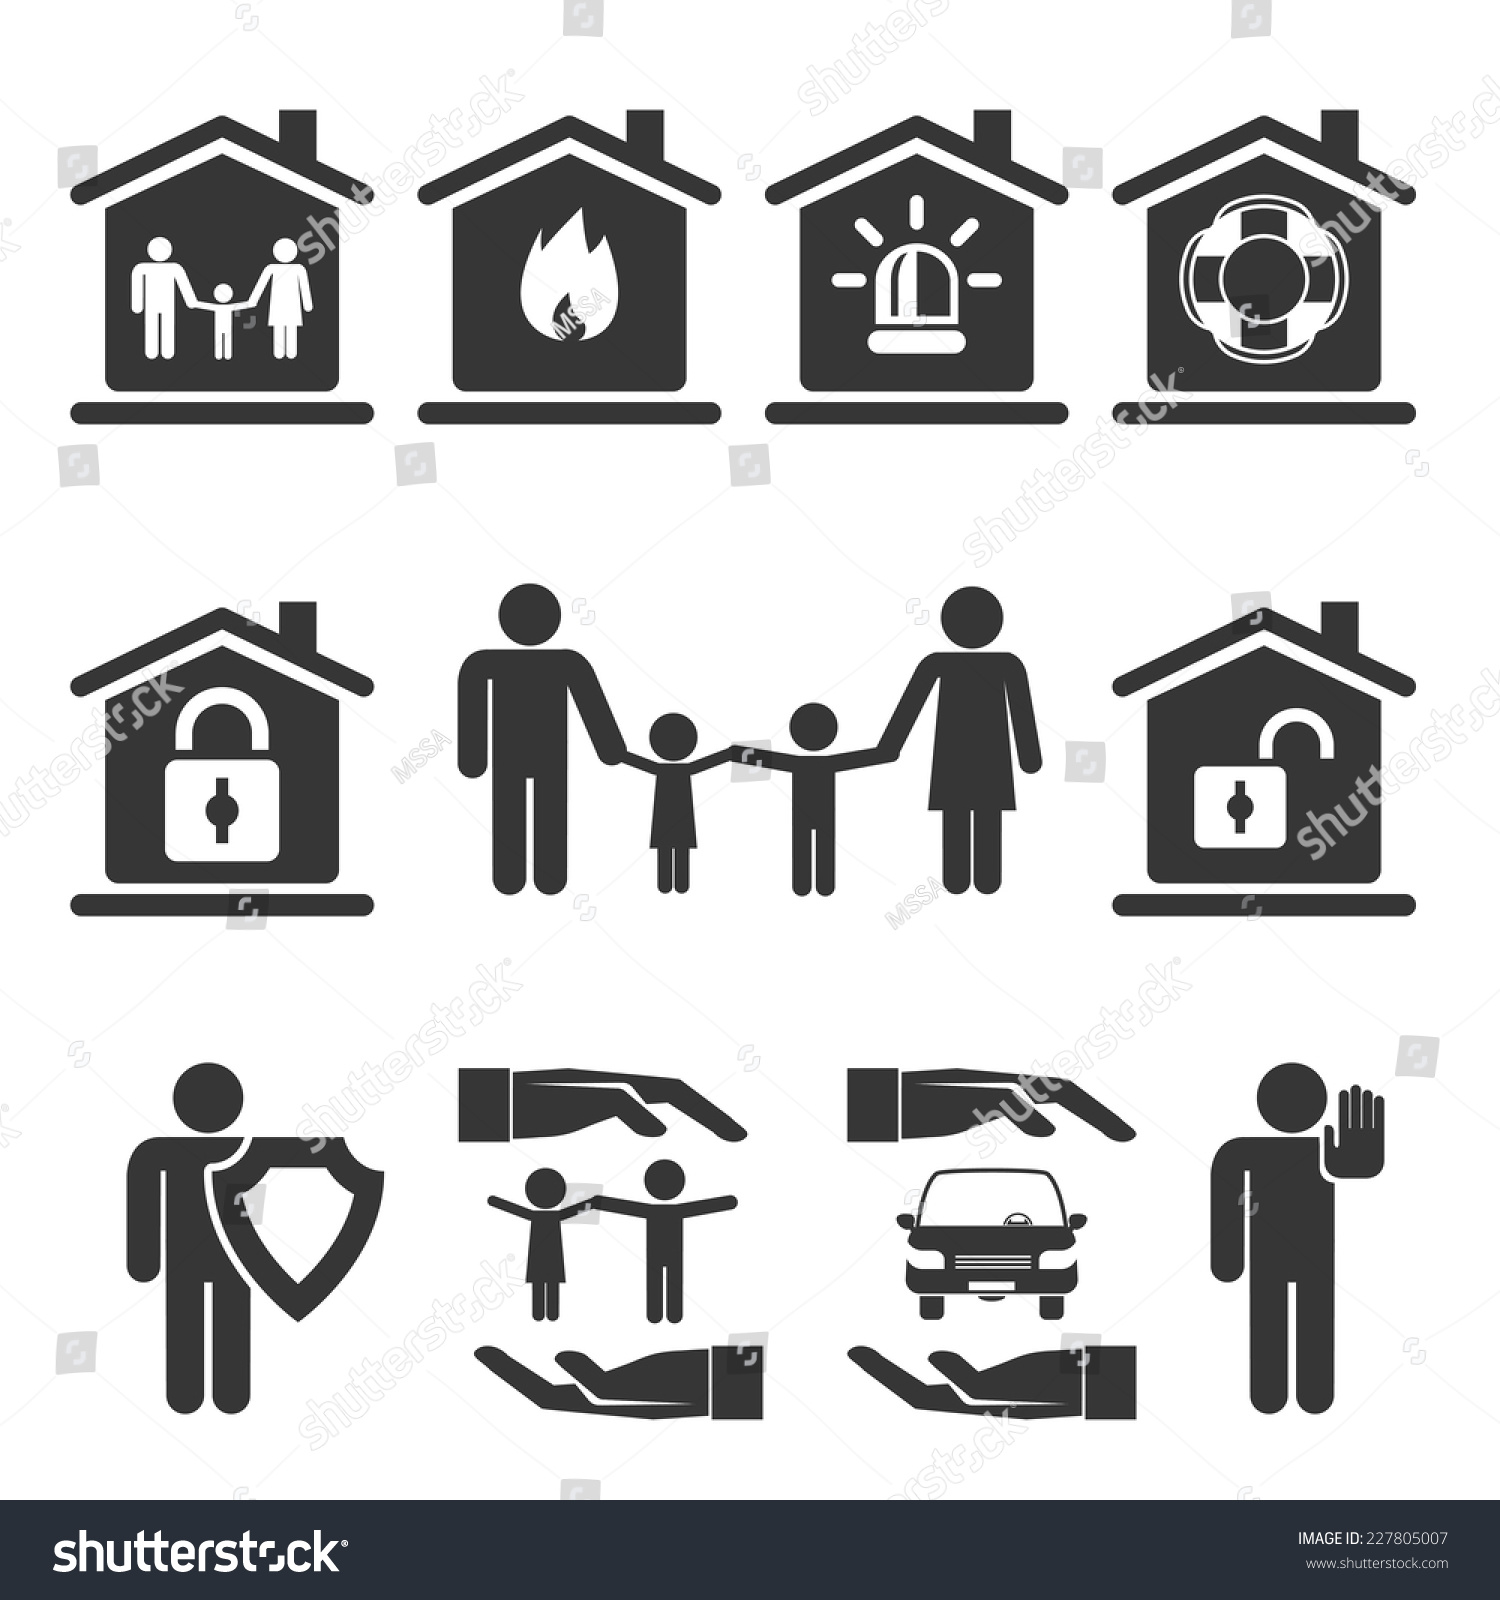 Download Gray Family Home Auto Insurance Icon Stock Vector (Royalty ...